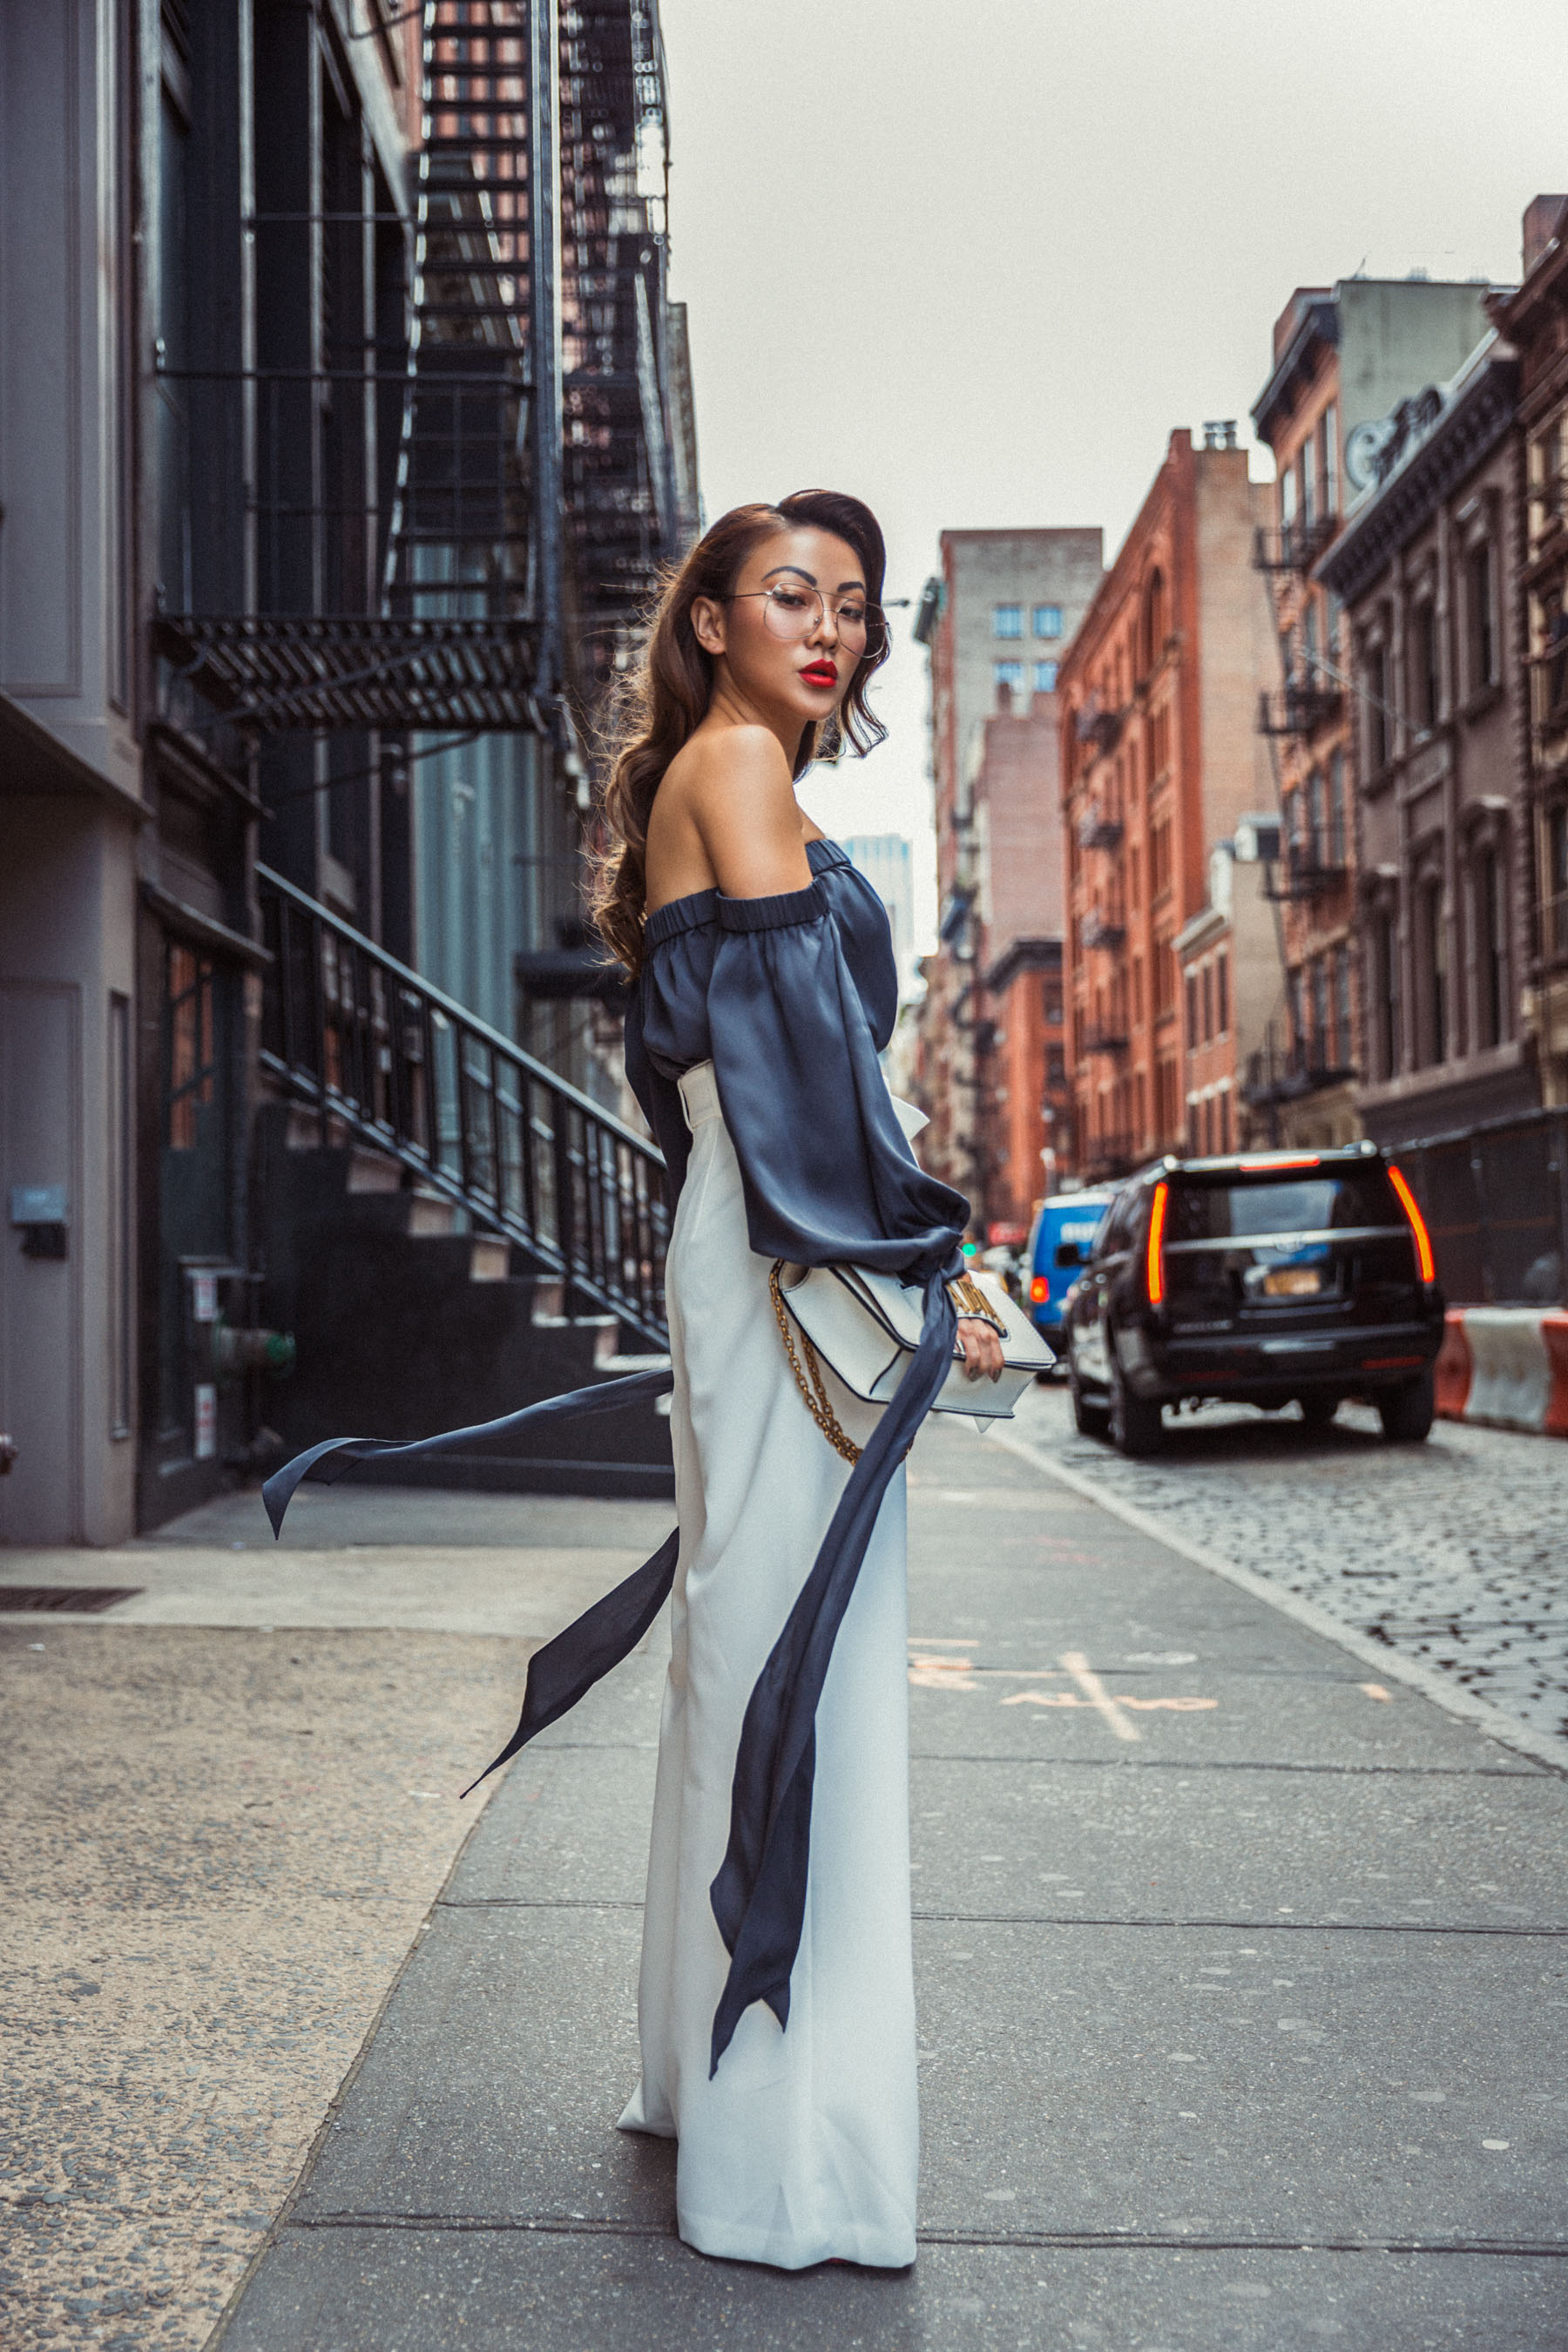 6 Crucial Tips for Surviving Fashion Week // Notjessfashion.com // Wide leg trousers, nyfw street style, nyfw ss18 street style, fashion blogger street style, fashion blogger nyfw, jessica wang, top blogger, nyc blogger, asian blogger, fashion week outfit